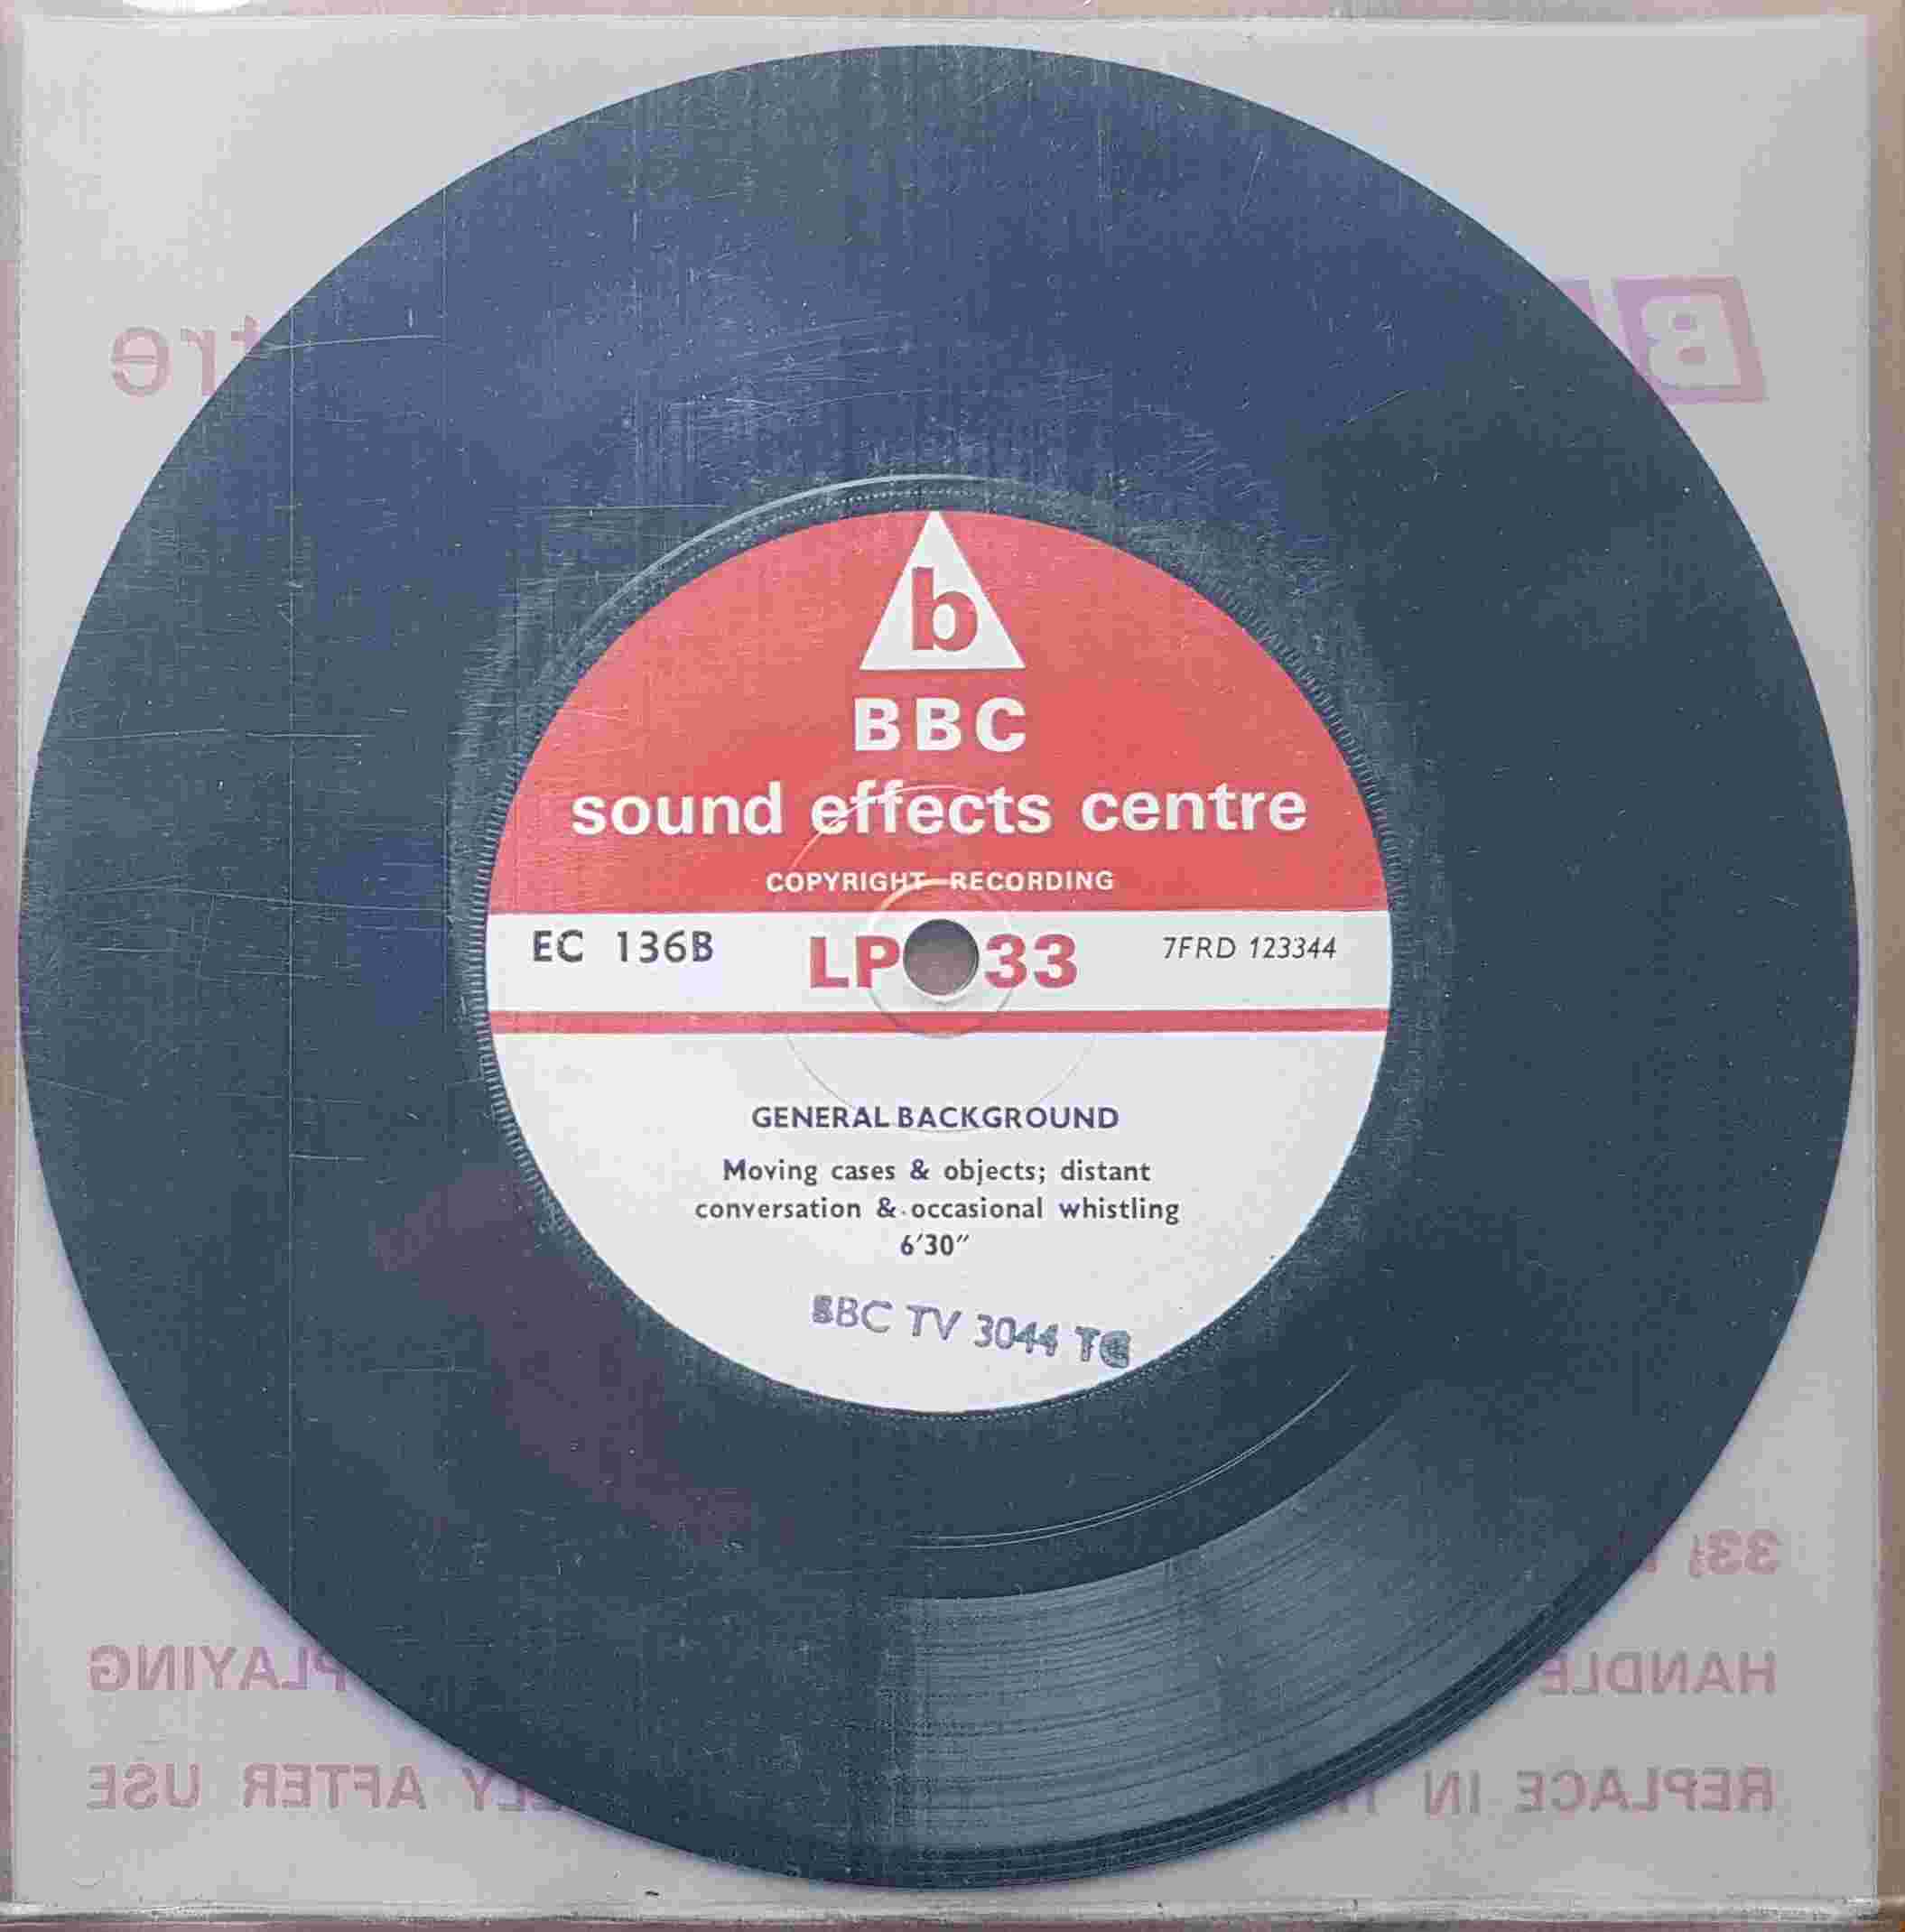 Picture of EC 136B General background by artist Not registered from the BBC records and Tapes library